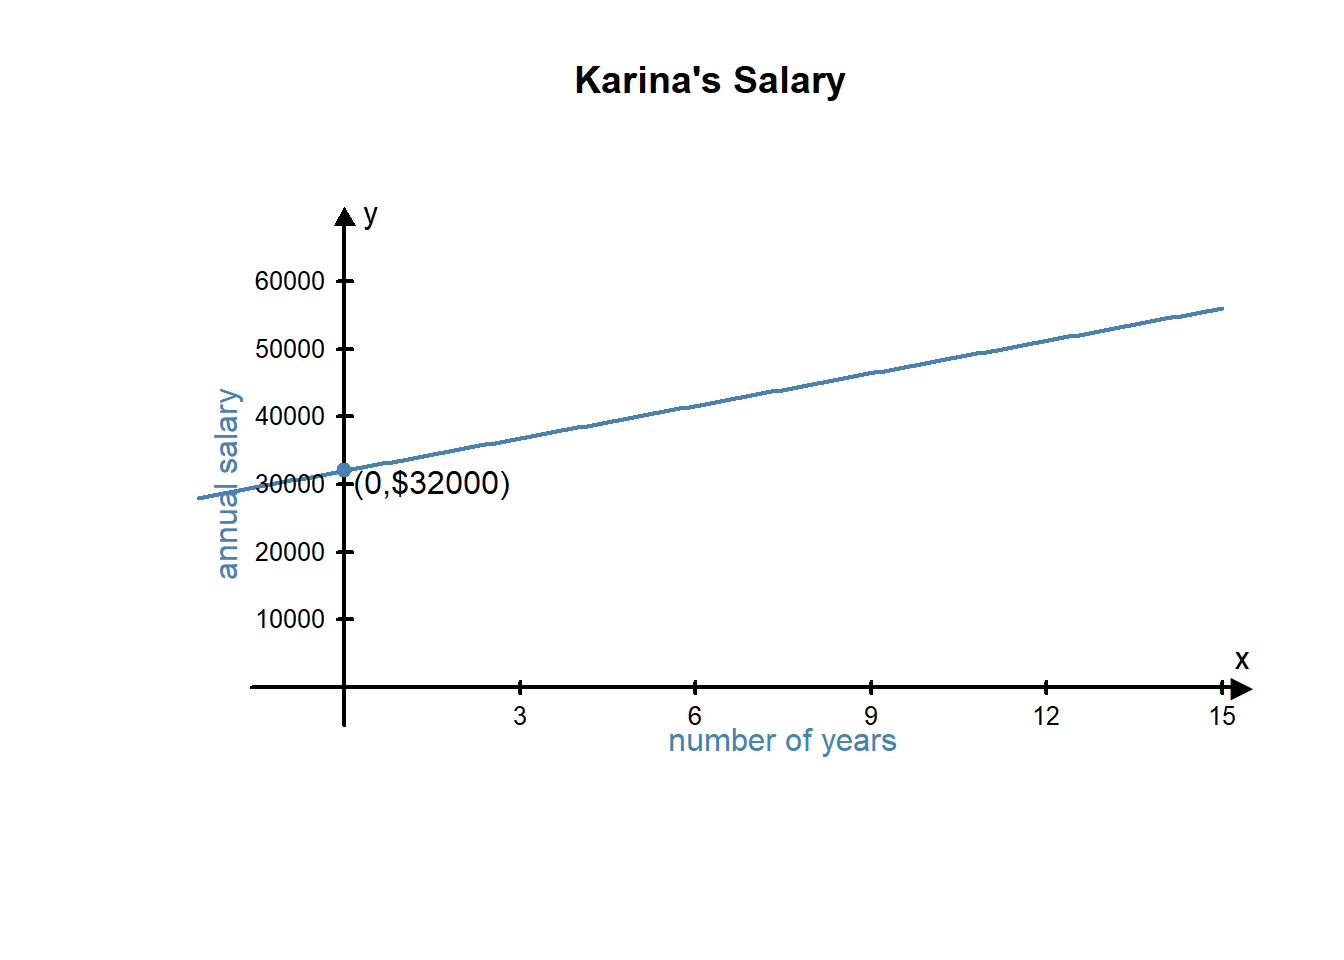 A linear graph showing Karina's annual salary over the number of years Karina has worked at her job. The line shows at year 0 she earned $32,000 and it is projected to make a steady rise the longer she works at her job.